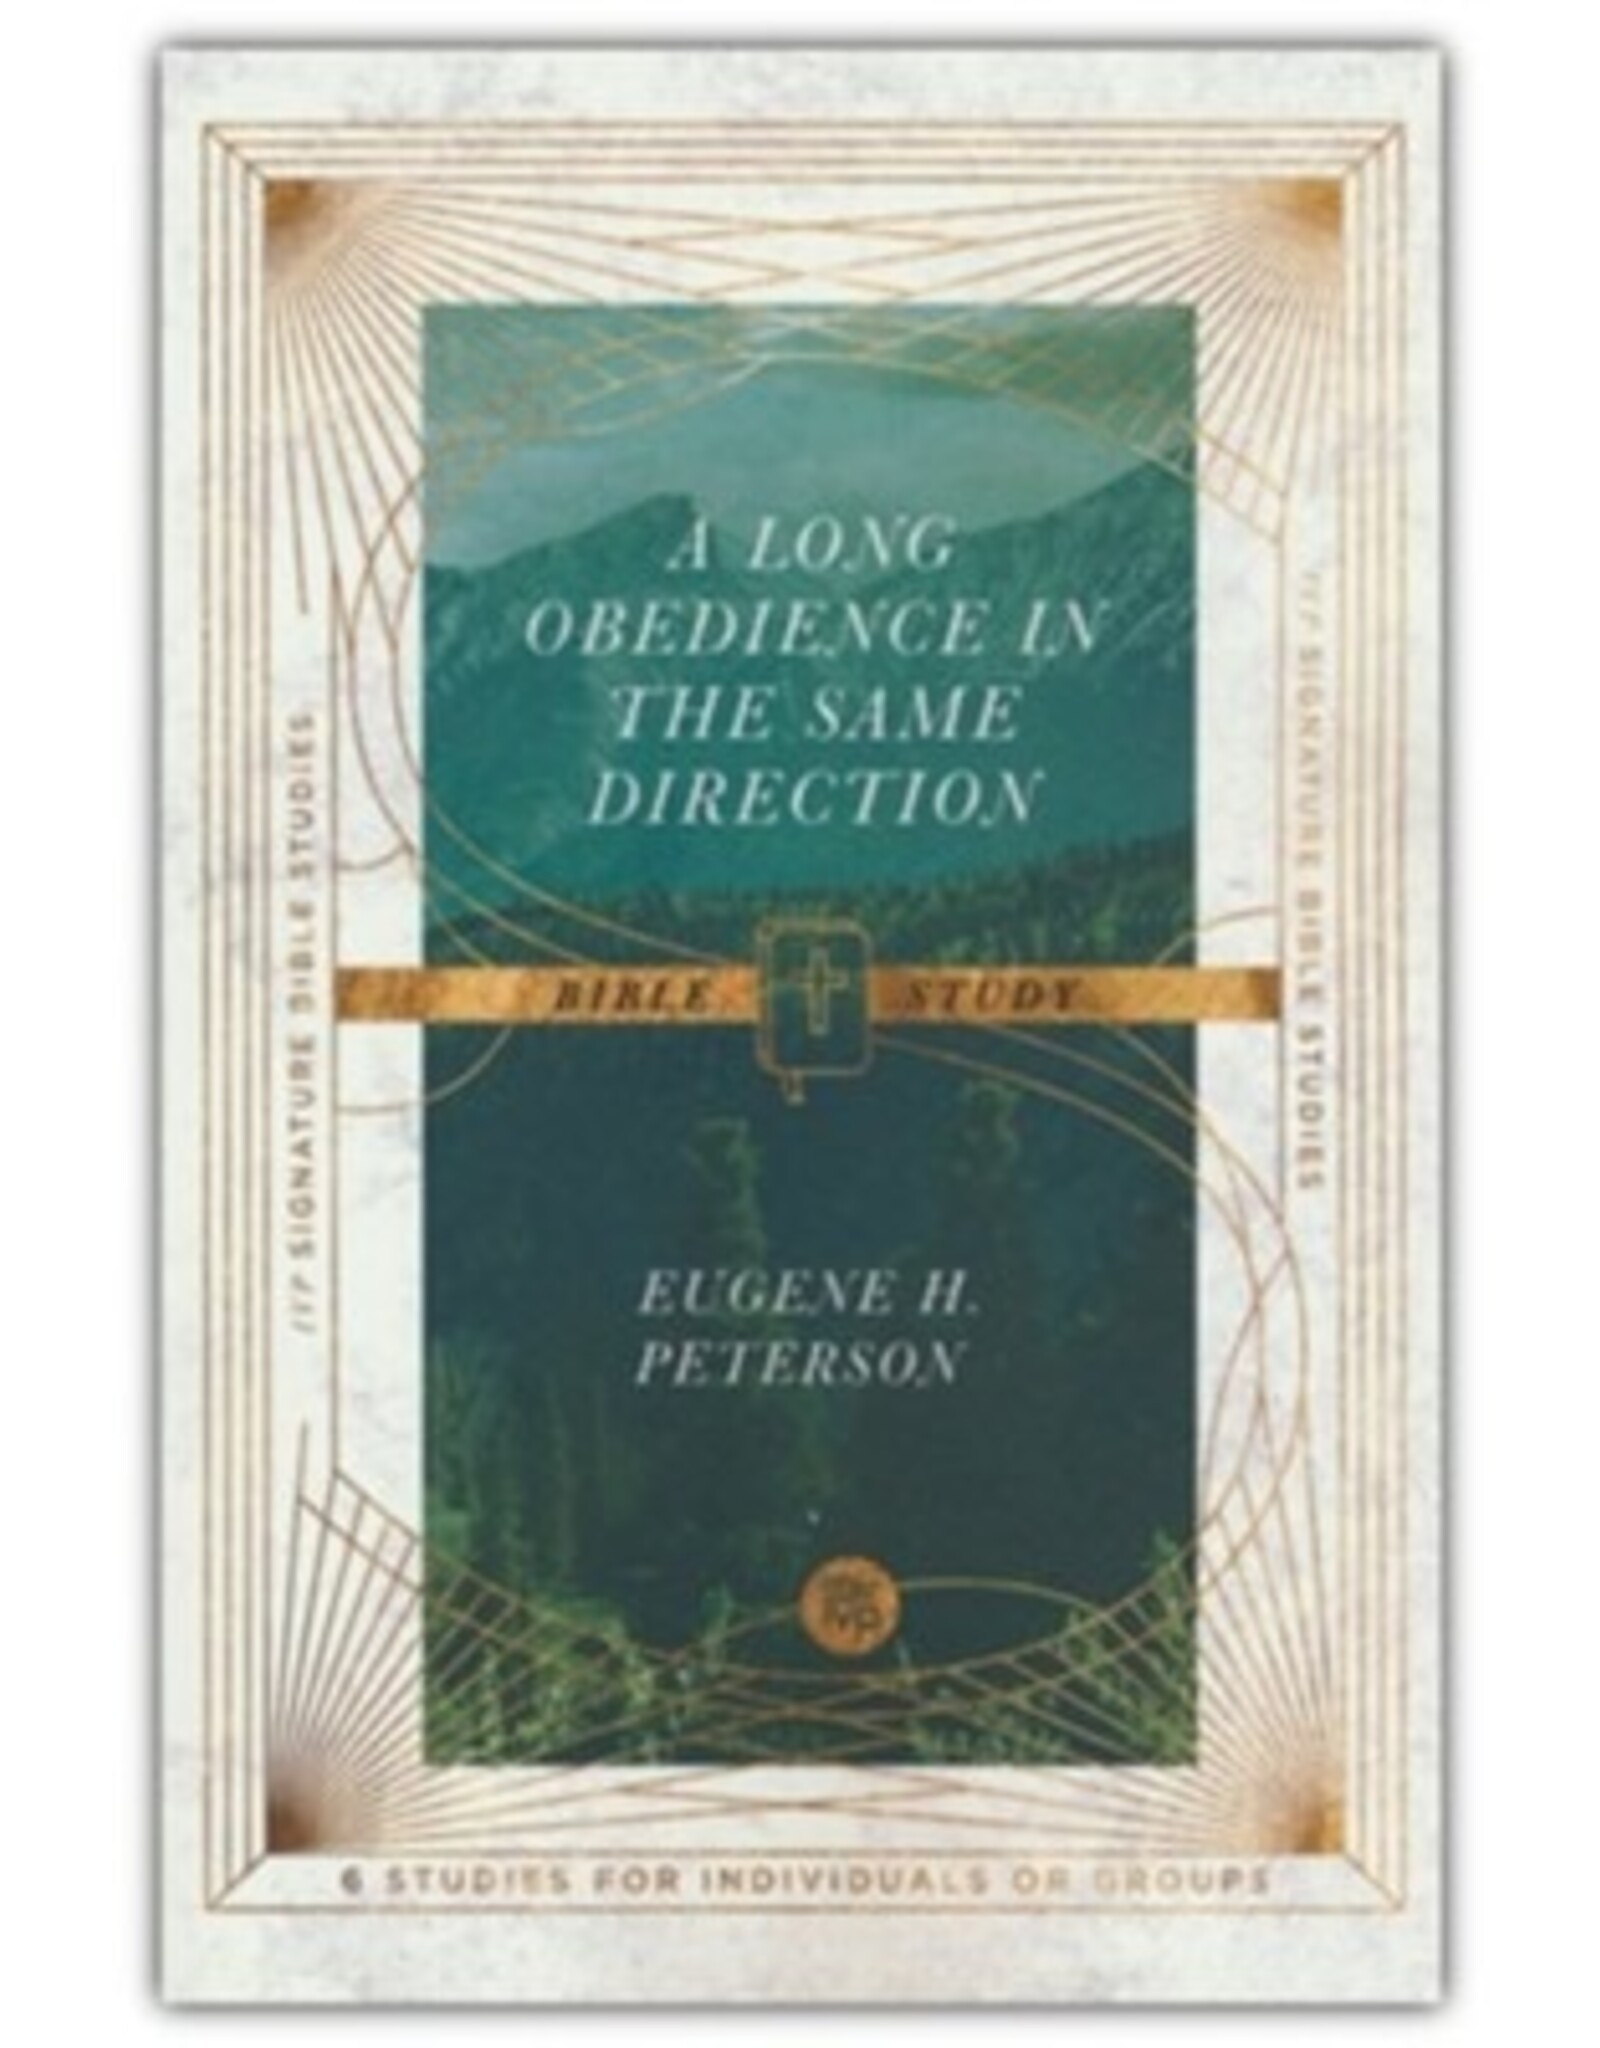 A Long Obedience In The Same Direction by Eugene H. Peterson